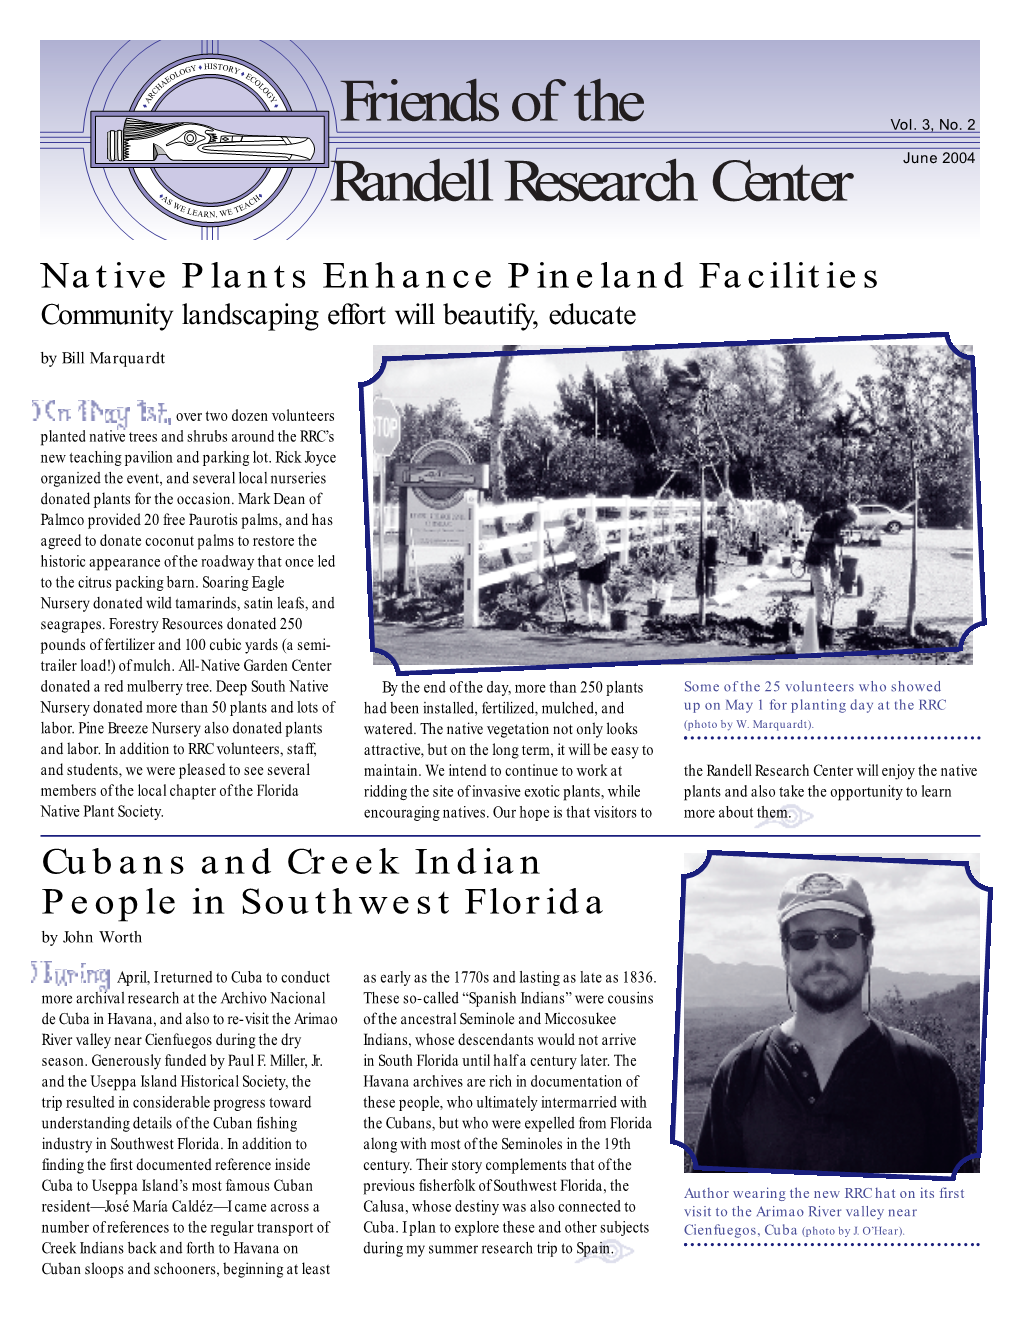 Friends of the Randell Research Center